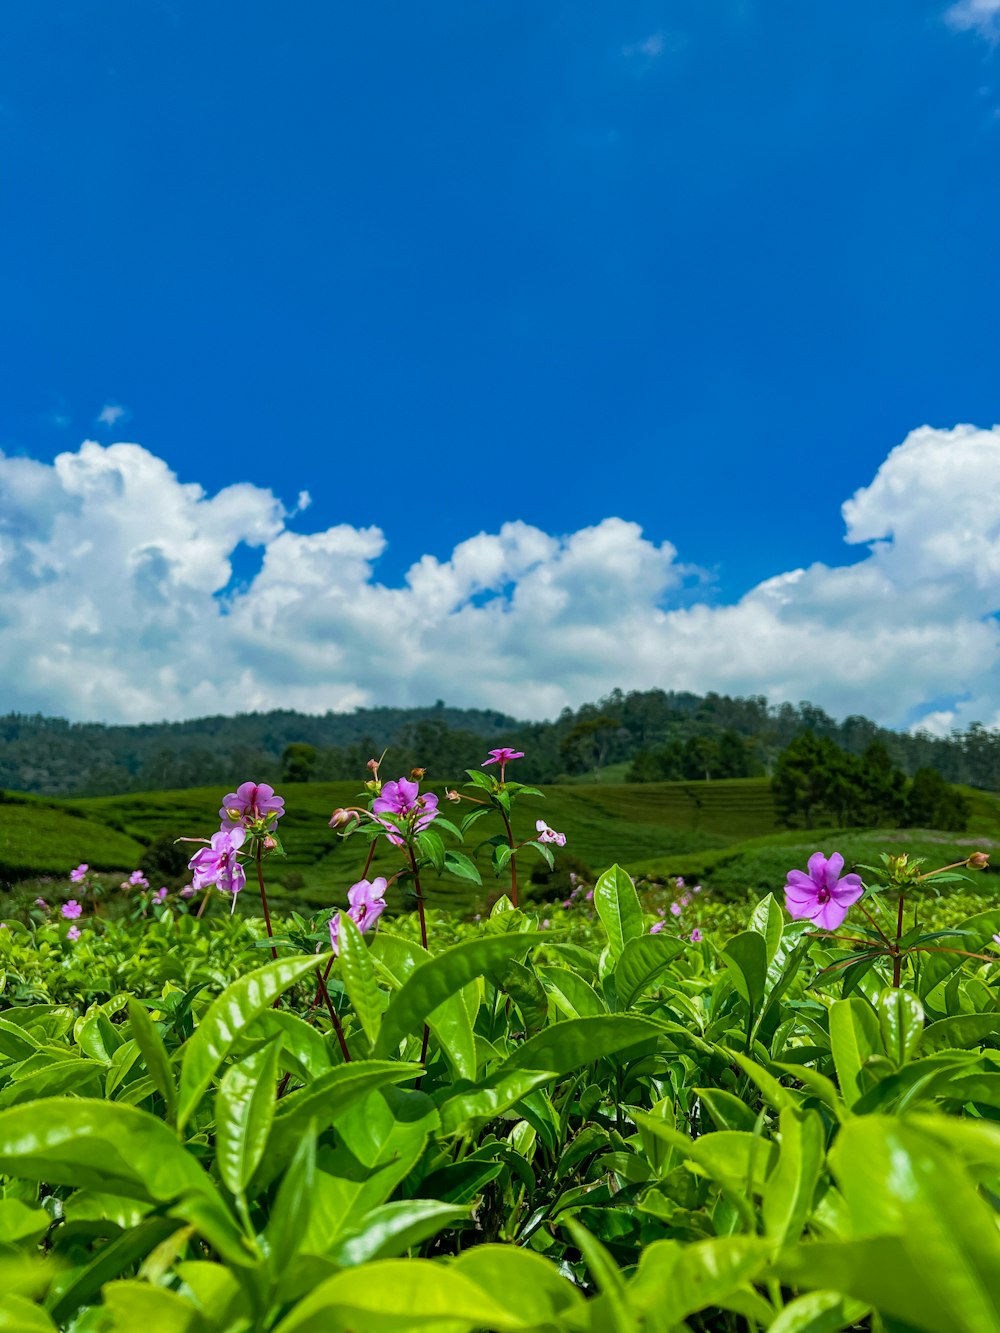 a lush green field with purple flowers under a blue sky